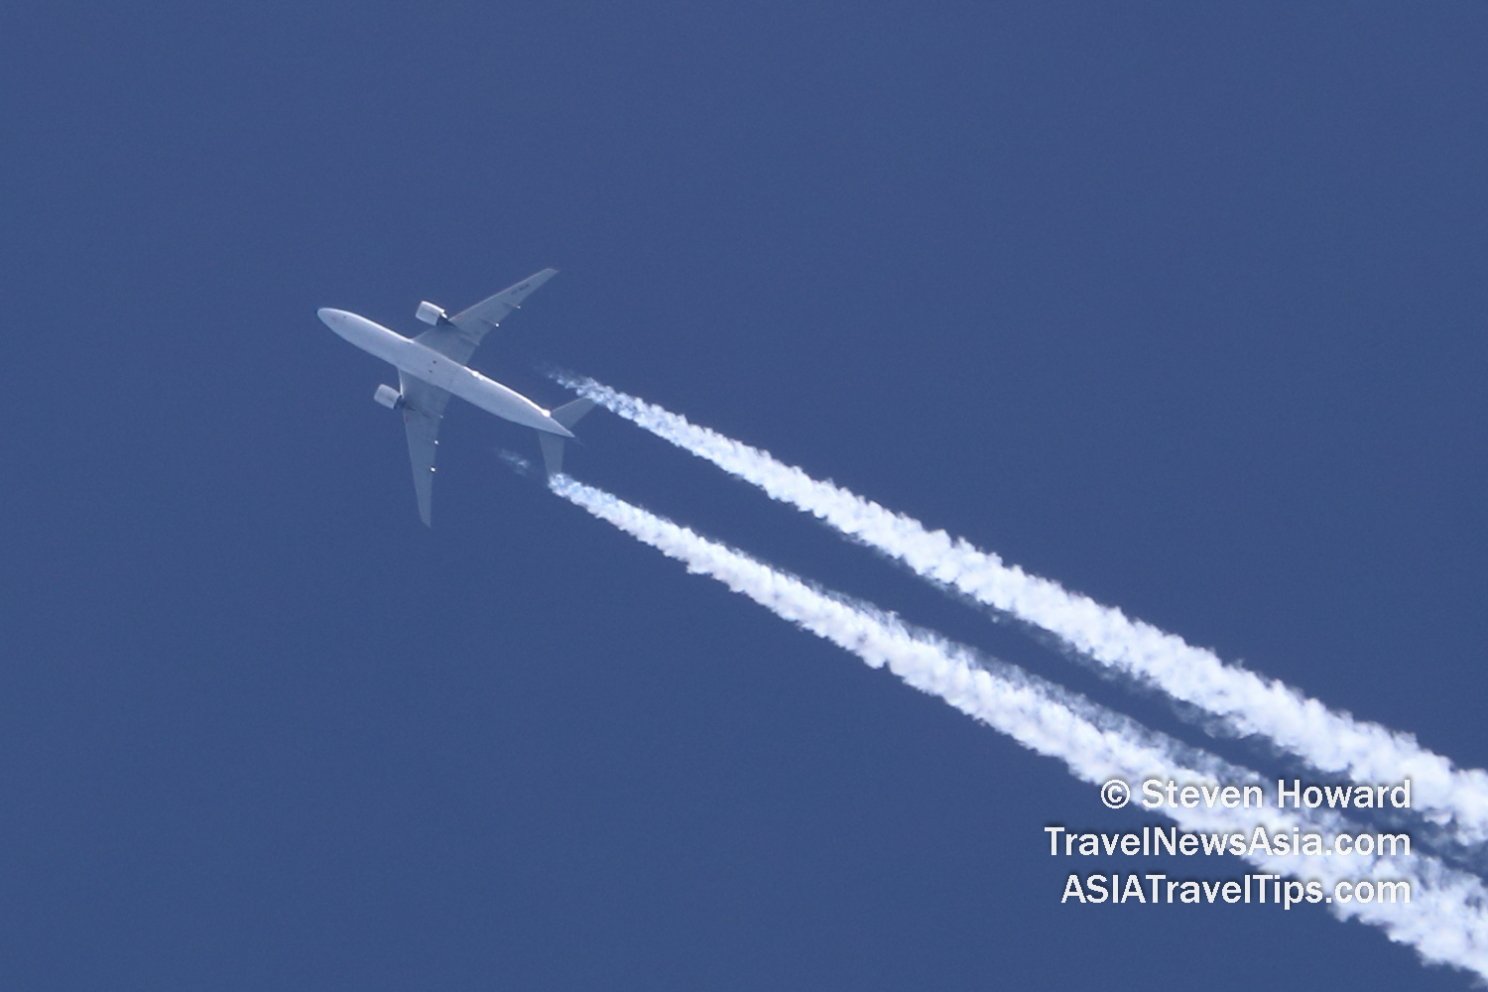 Aircraft flying overhead with contrails. Picture by Steven Howard of TravelNewsAsia.com Click to enlarge.